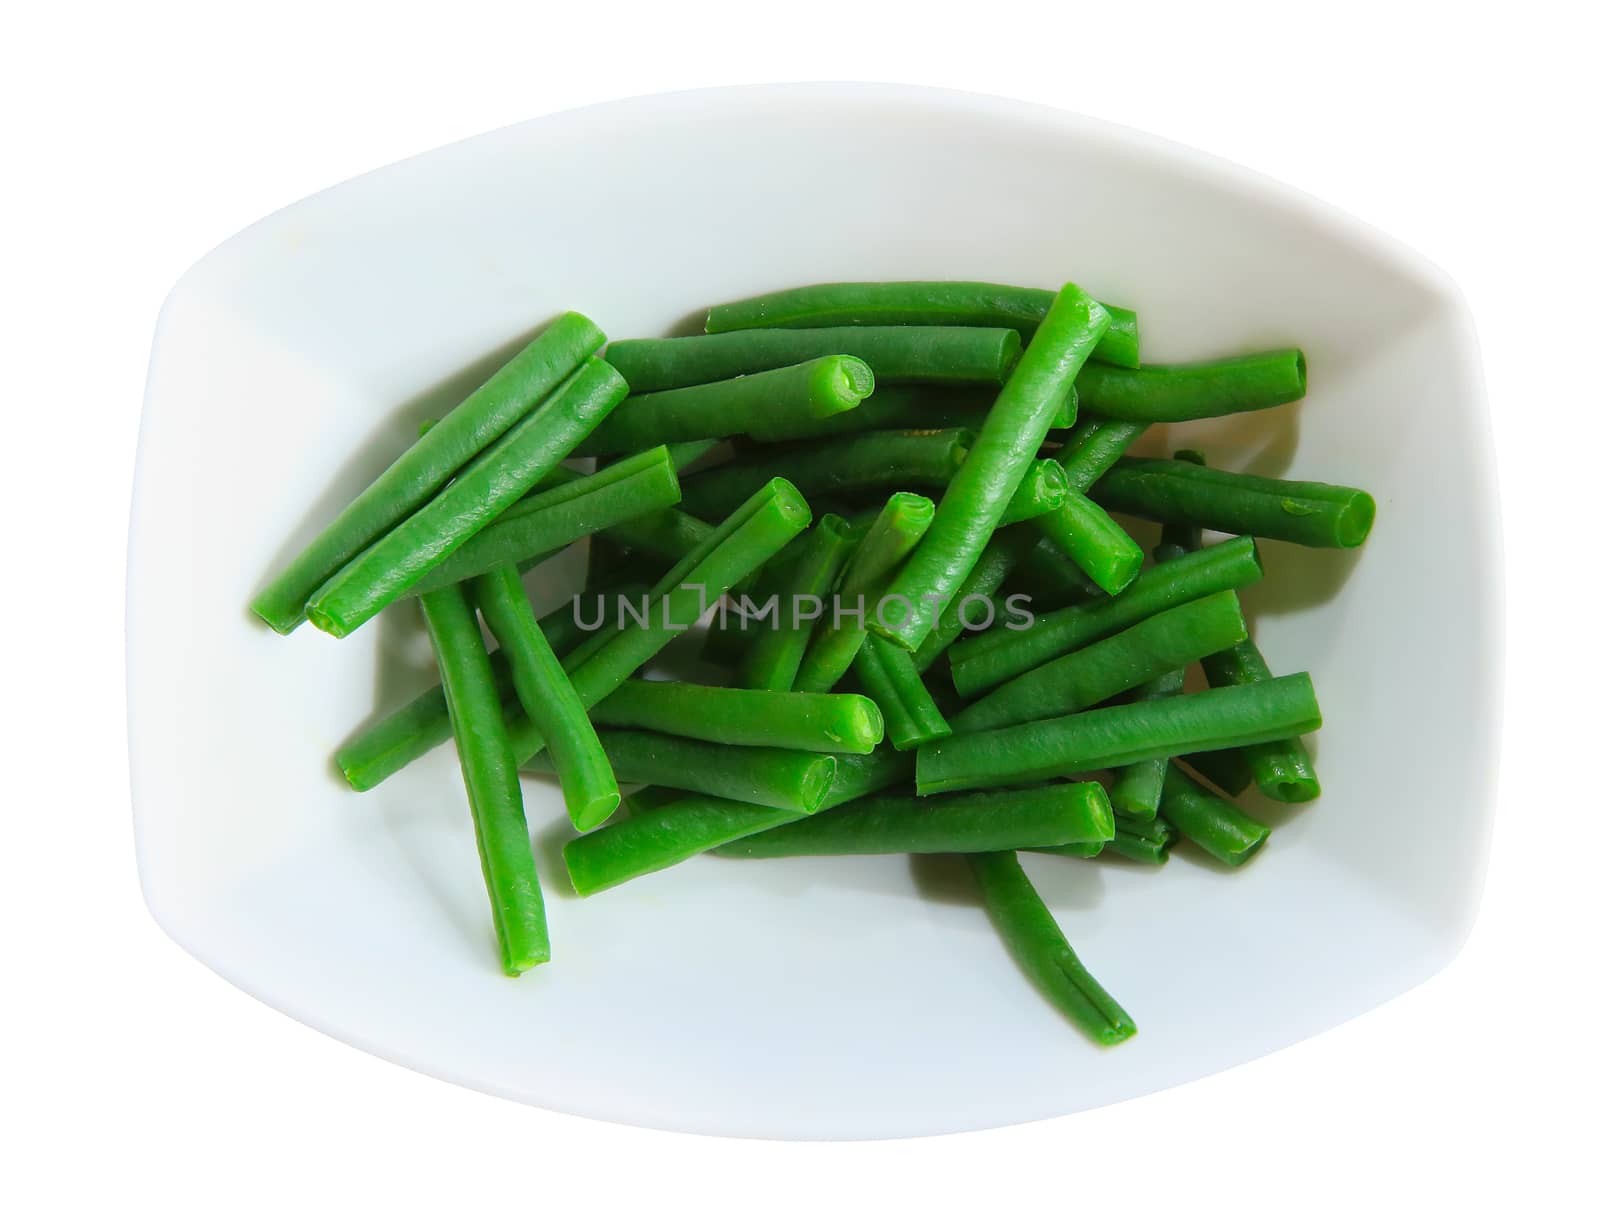 Green beans in a white plate, isolated, on white background 